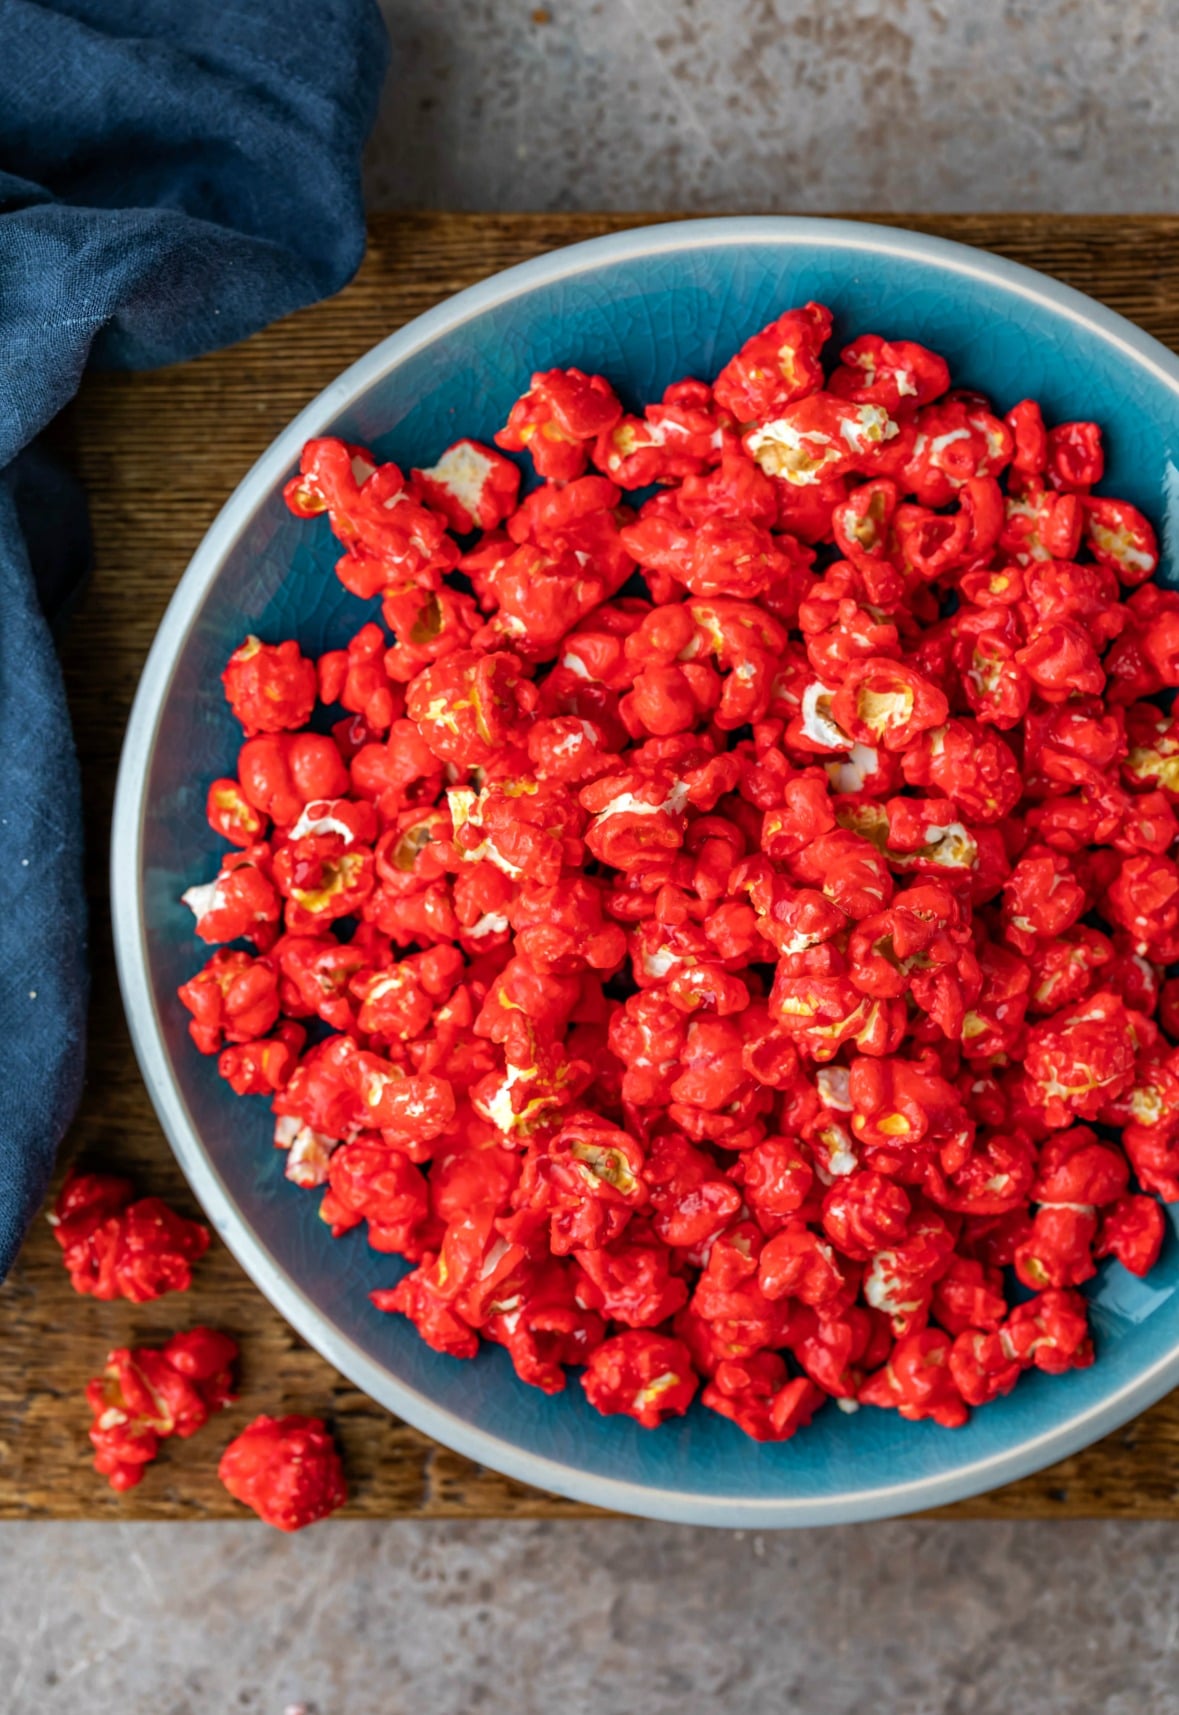 Plate of red hot cinnamon popcorn next to a blue linen napkin